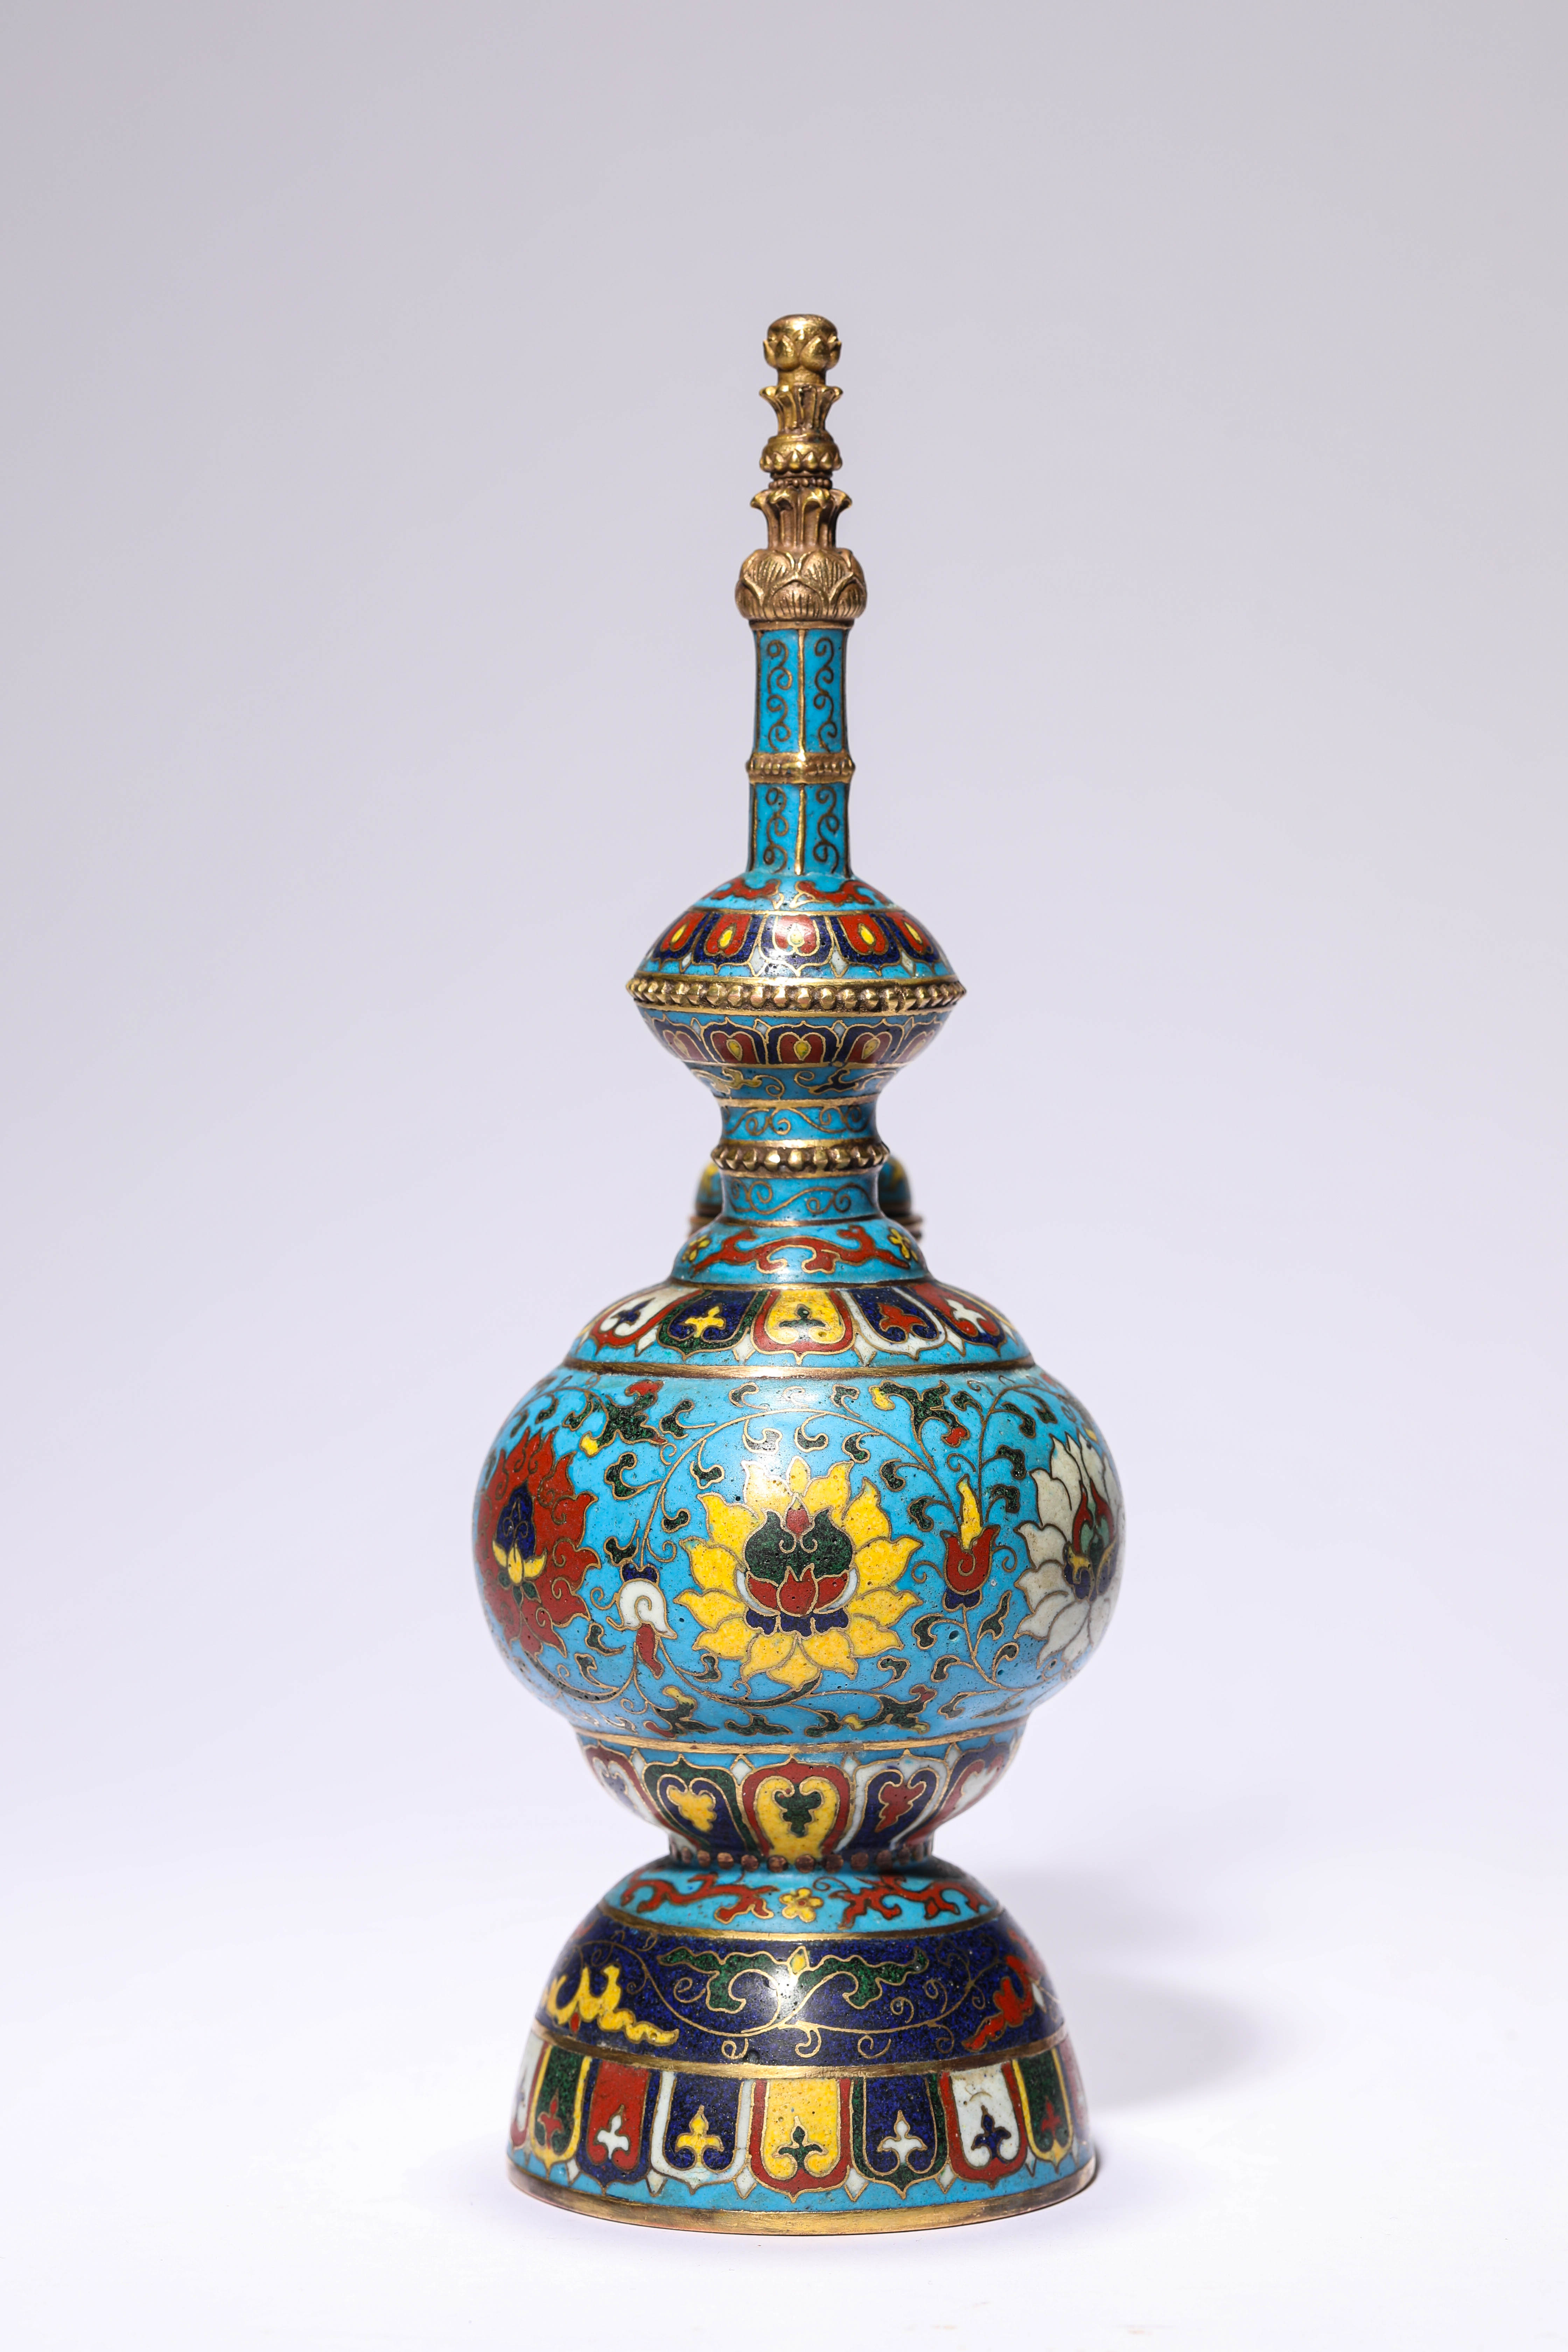 FINE CHINESE CLOISONNE, 17TH/18TH Century Pr.  Collection of NARA private gallary.  - Image 5 of 6